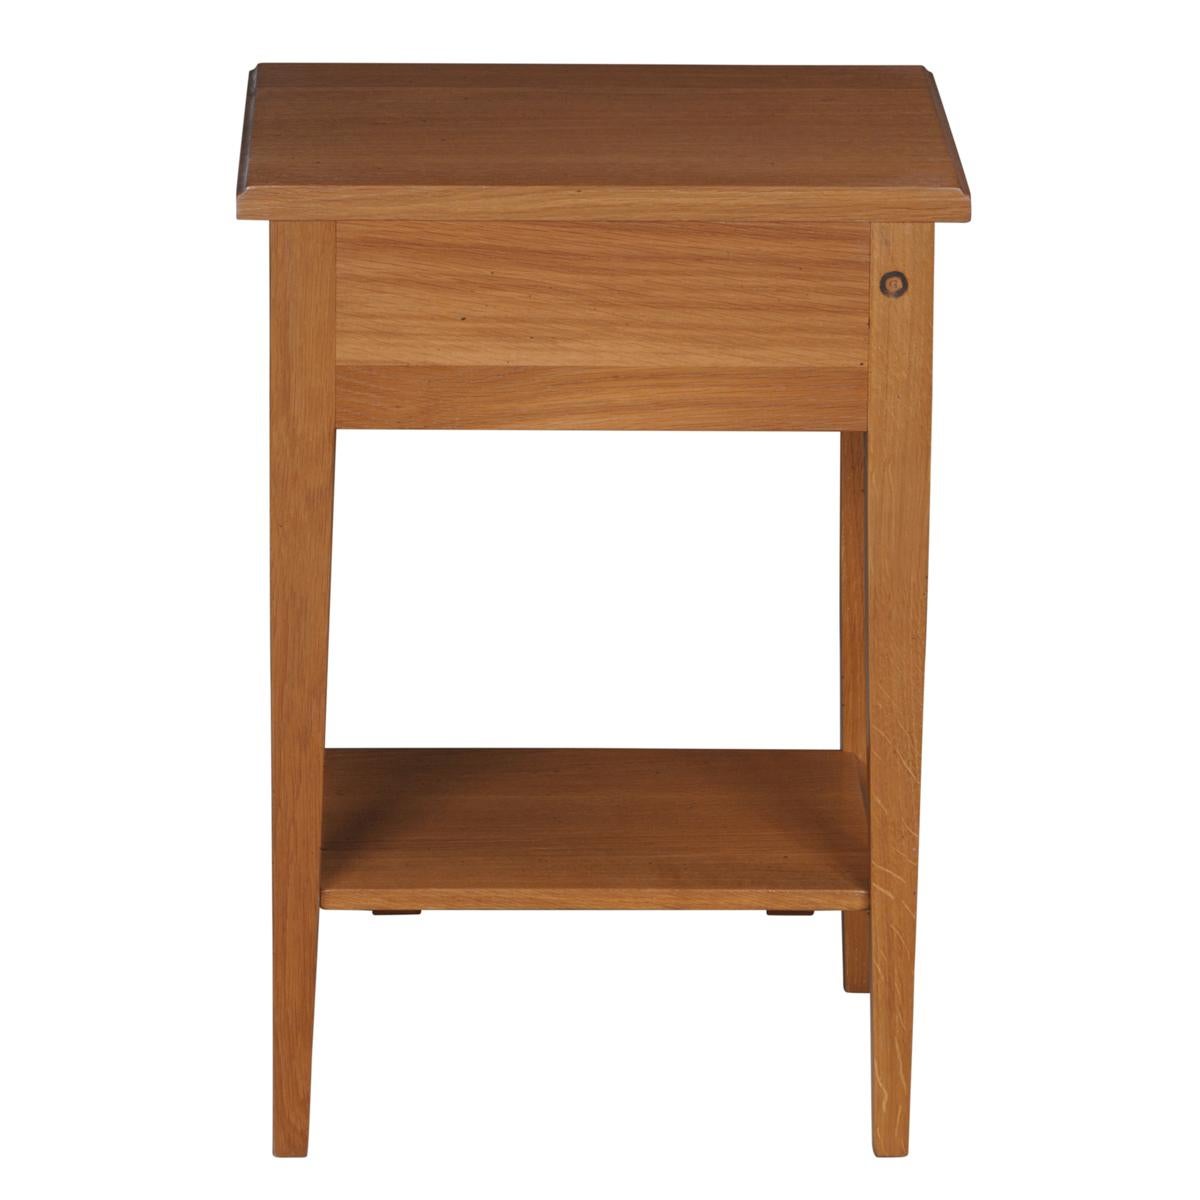 French Neo Classical Style Bedside Table in Solid Oak, 1 Drawer For Sale 2